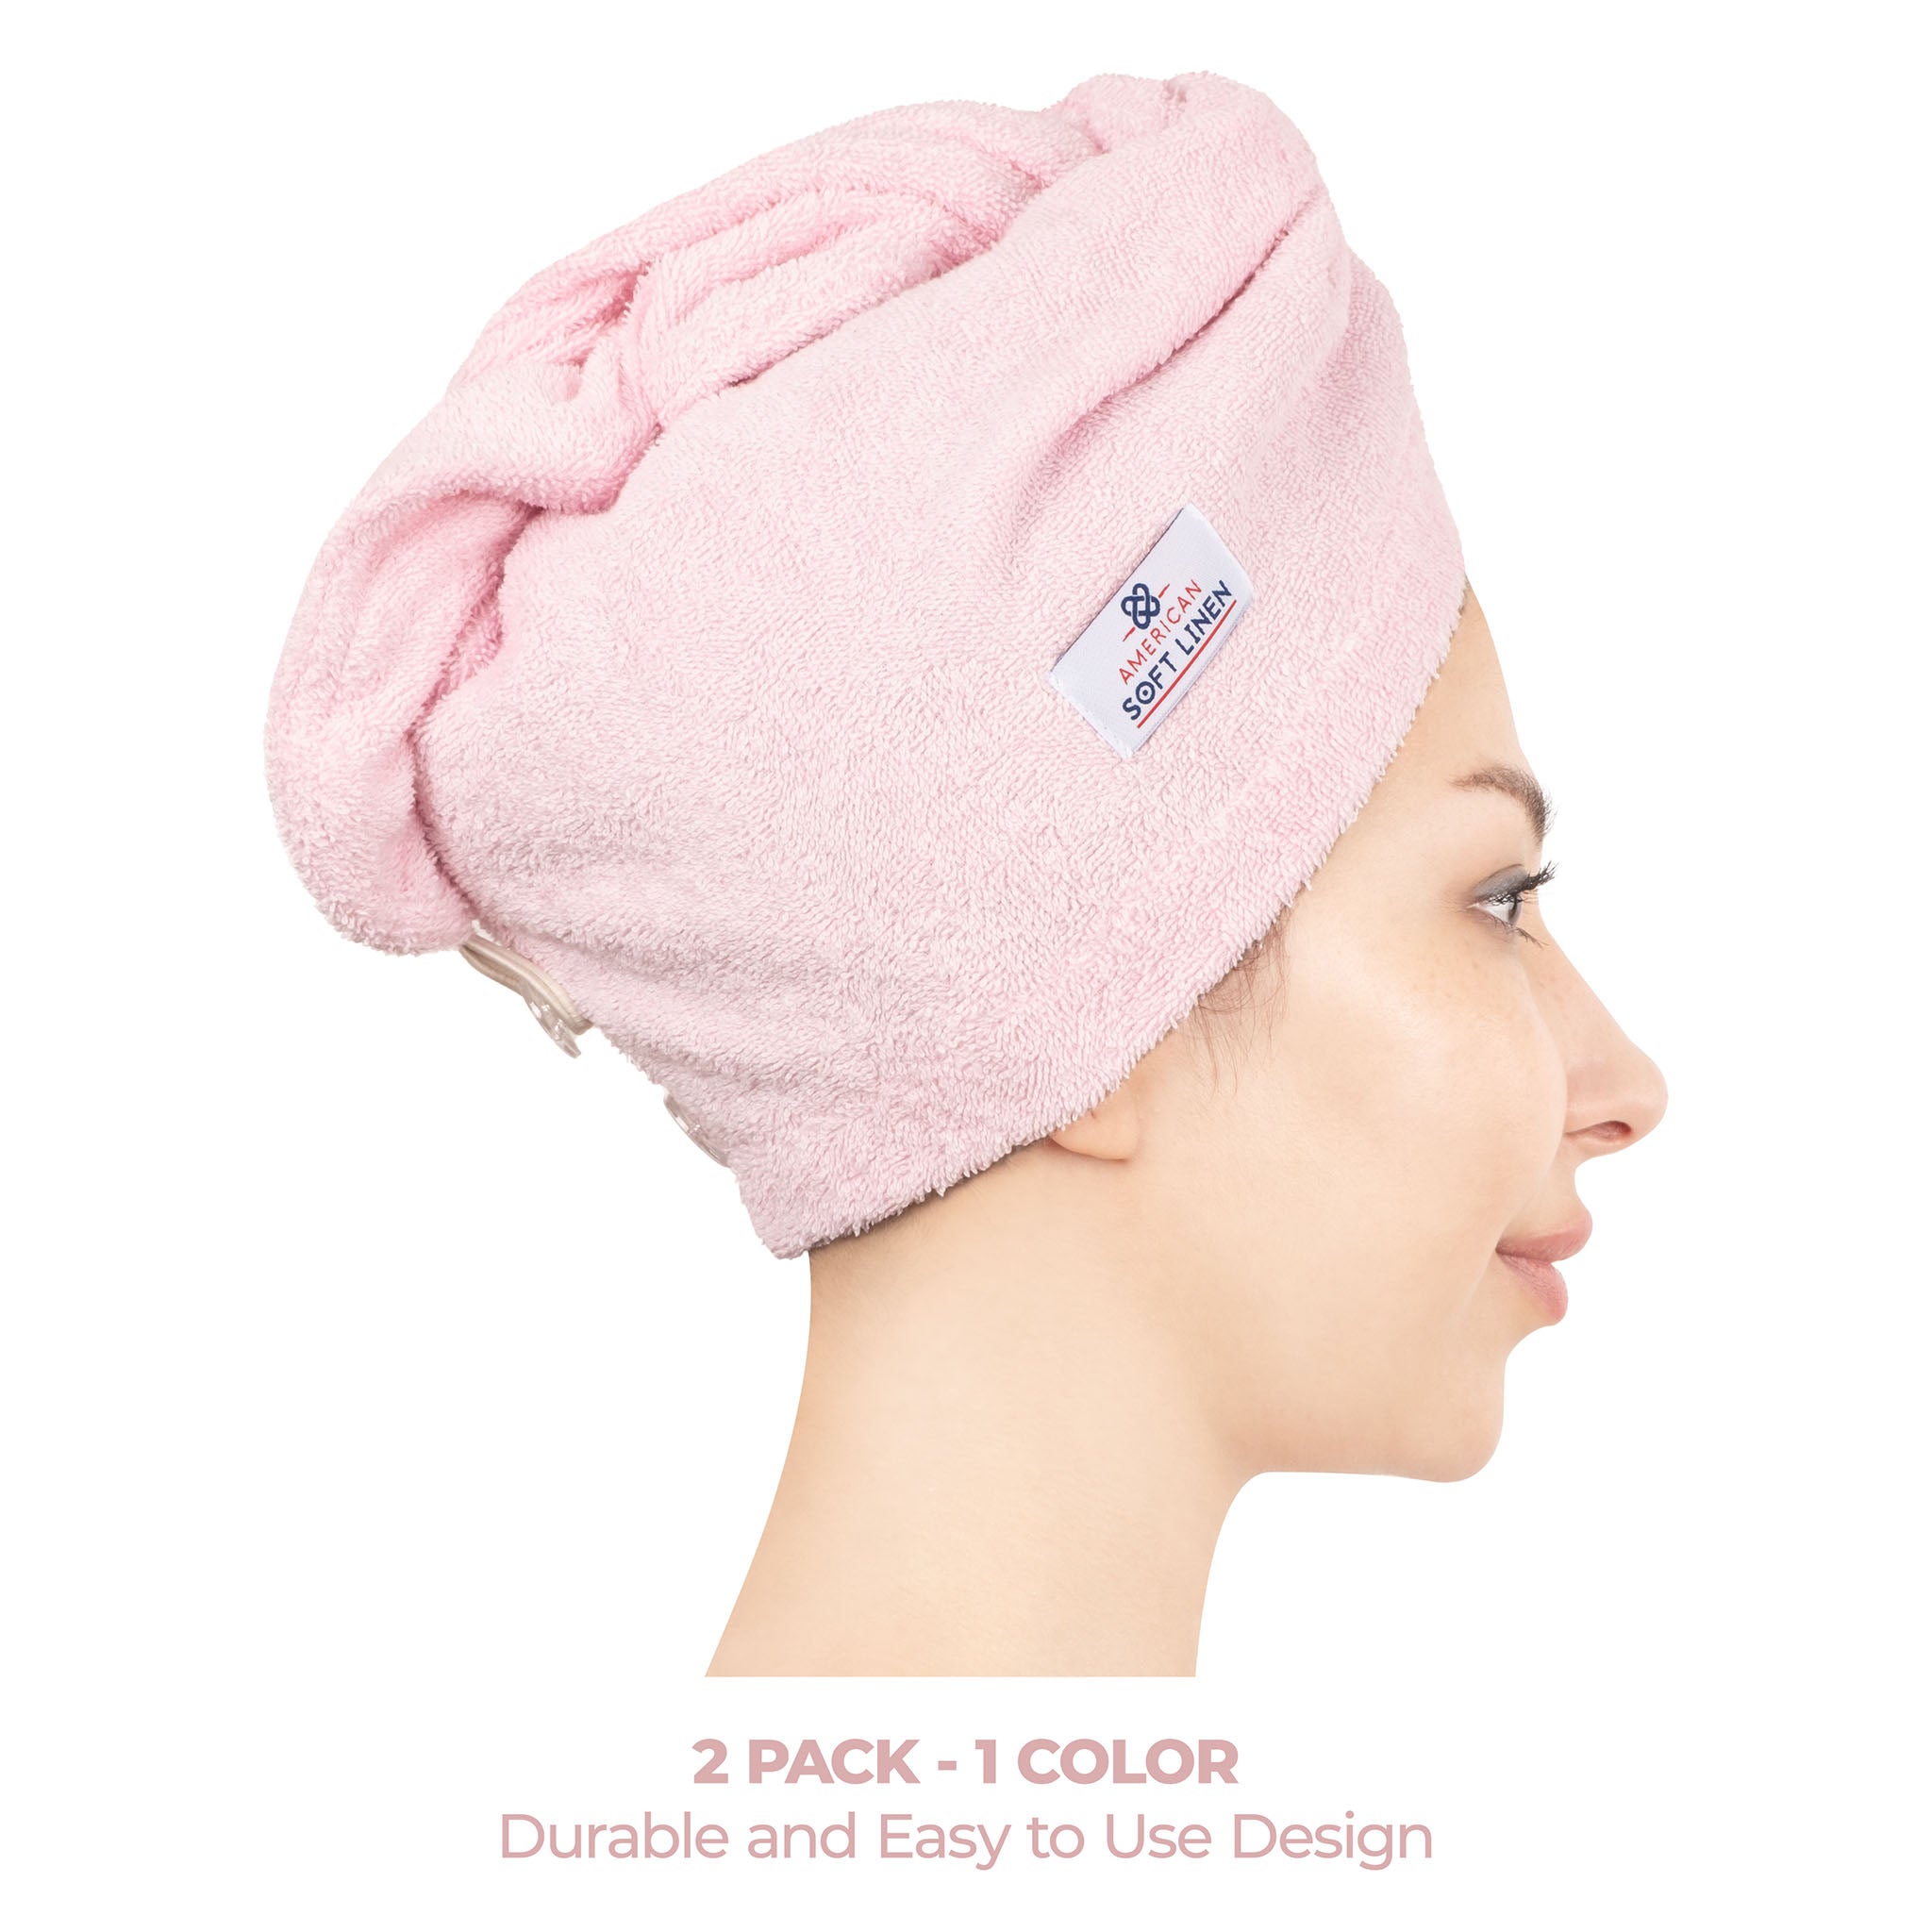 American Soft Linen 100% Cotton Hair Drying Towels for Women 2 pack 75 set case pack pink-2